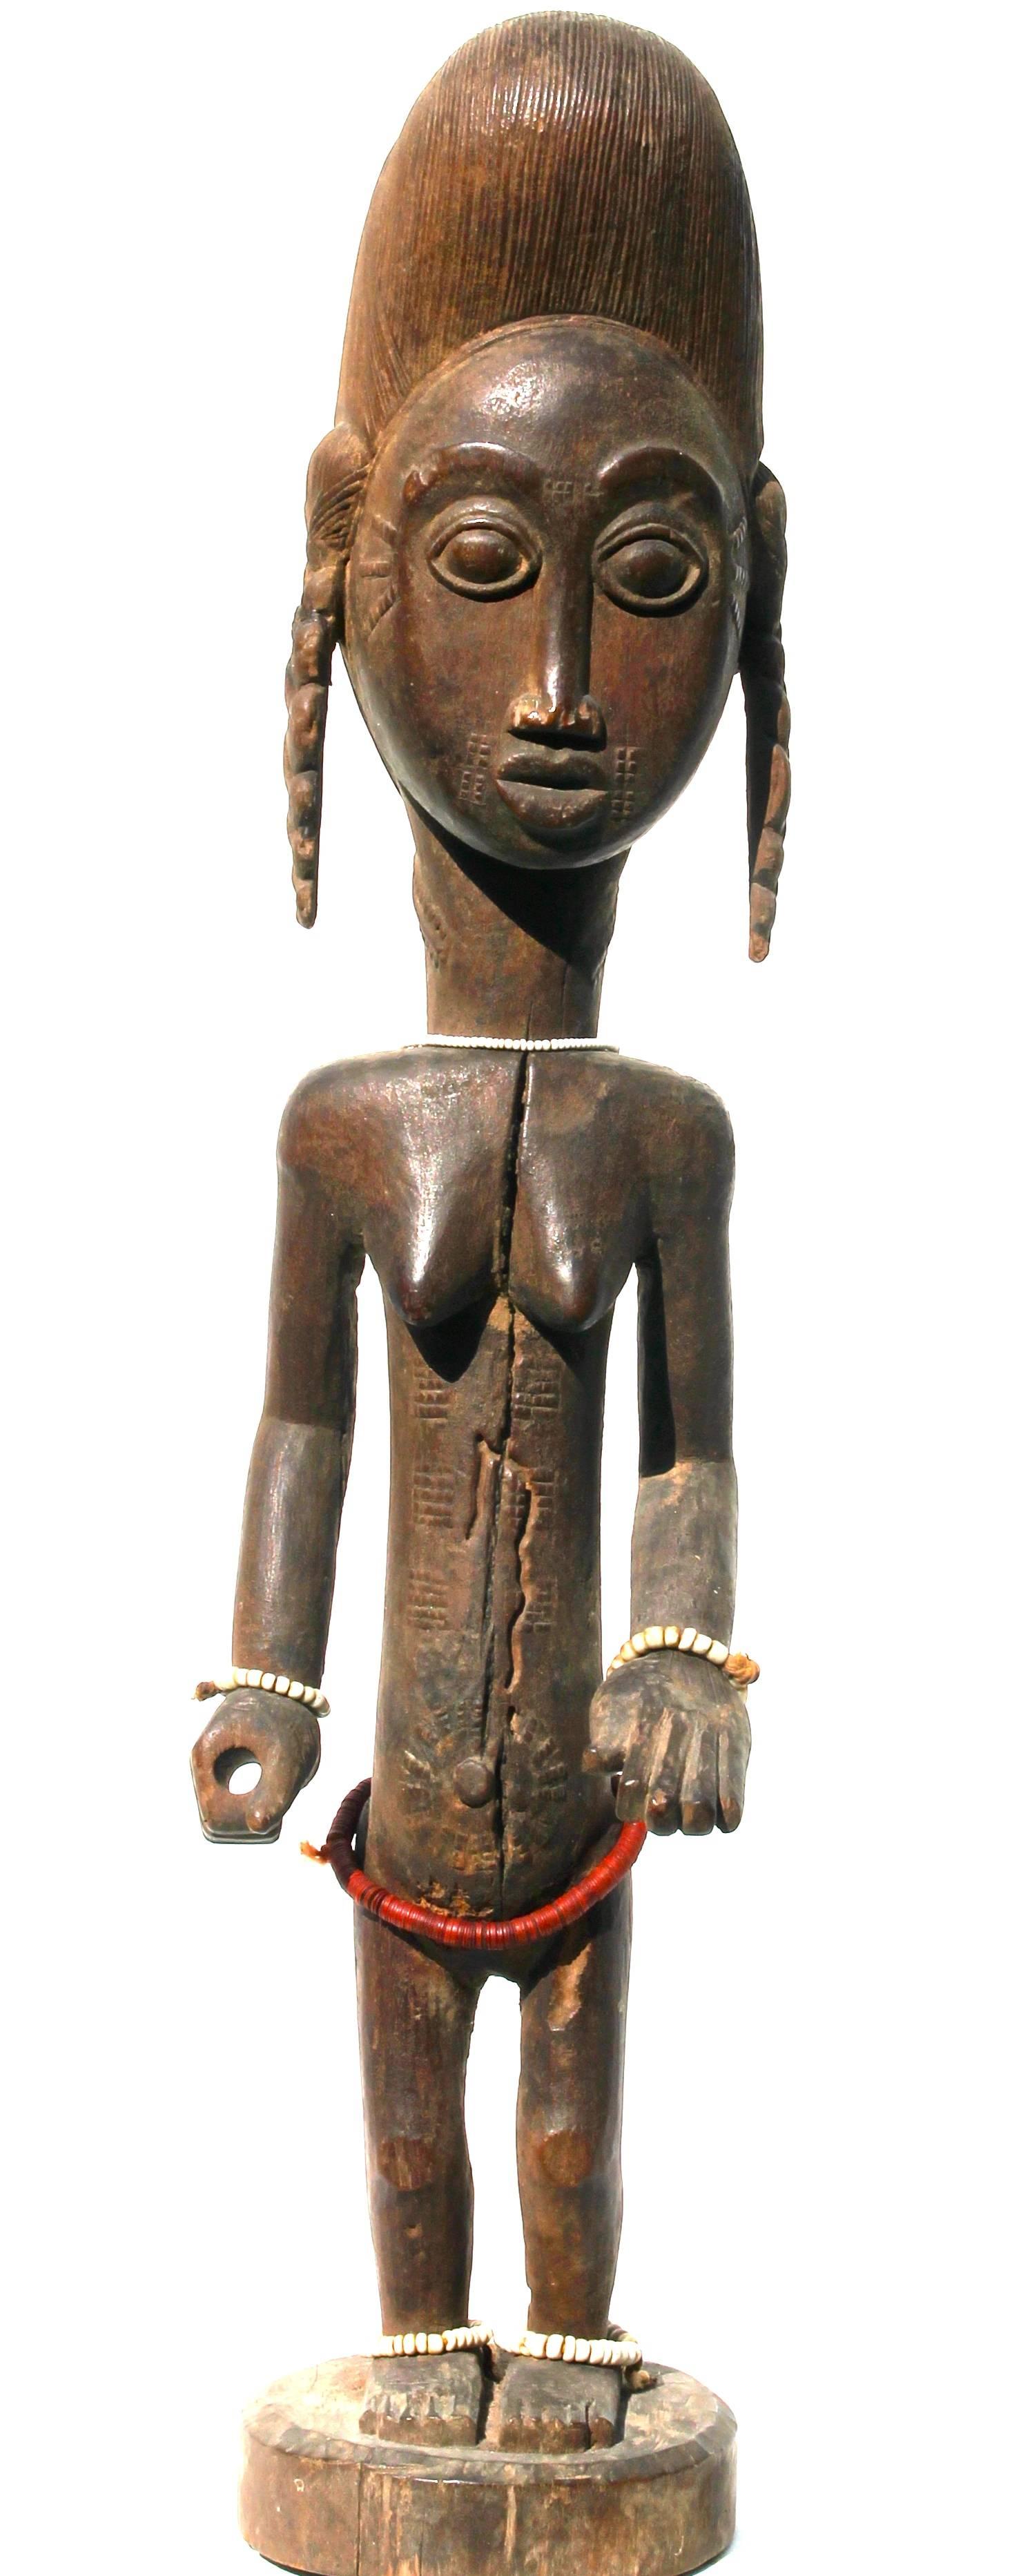 A fine Baule female figure. Provenance: The Alexander S. Honig collection of African Art, May 18, 1993, Lot: 78, Sotheby's New York.